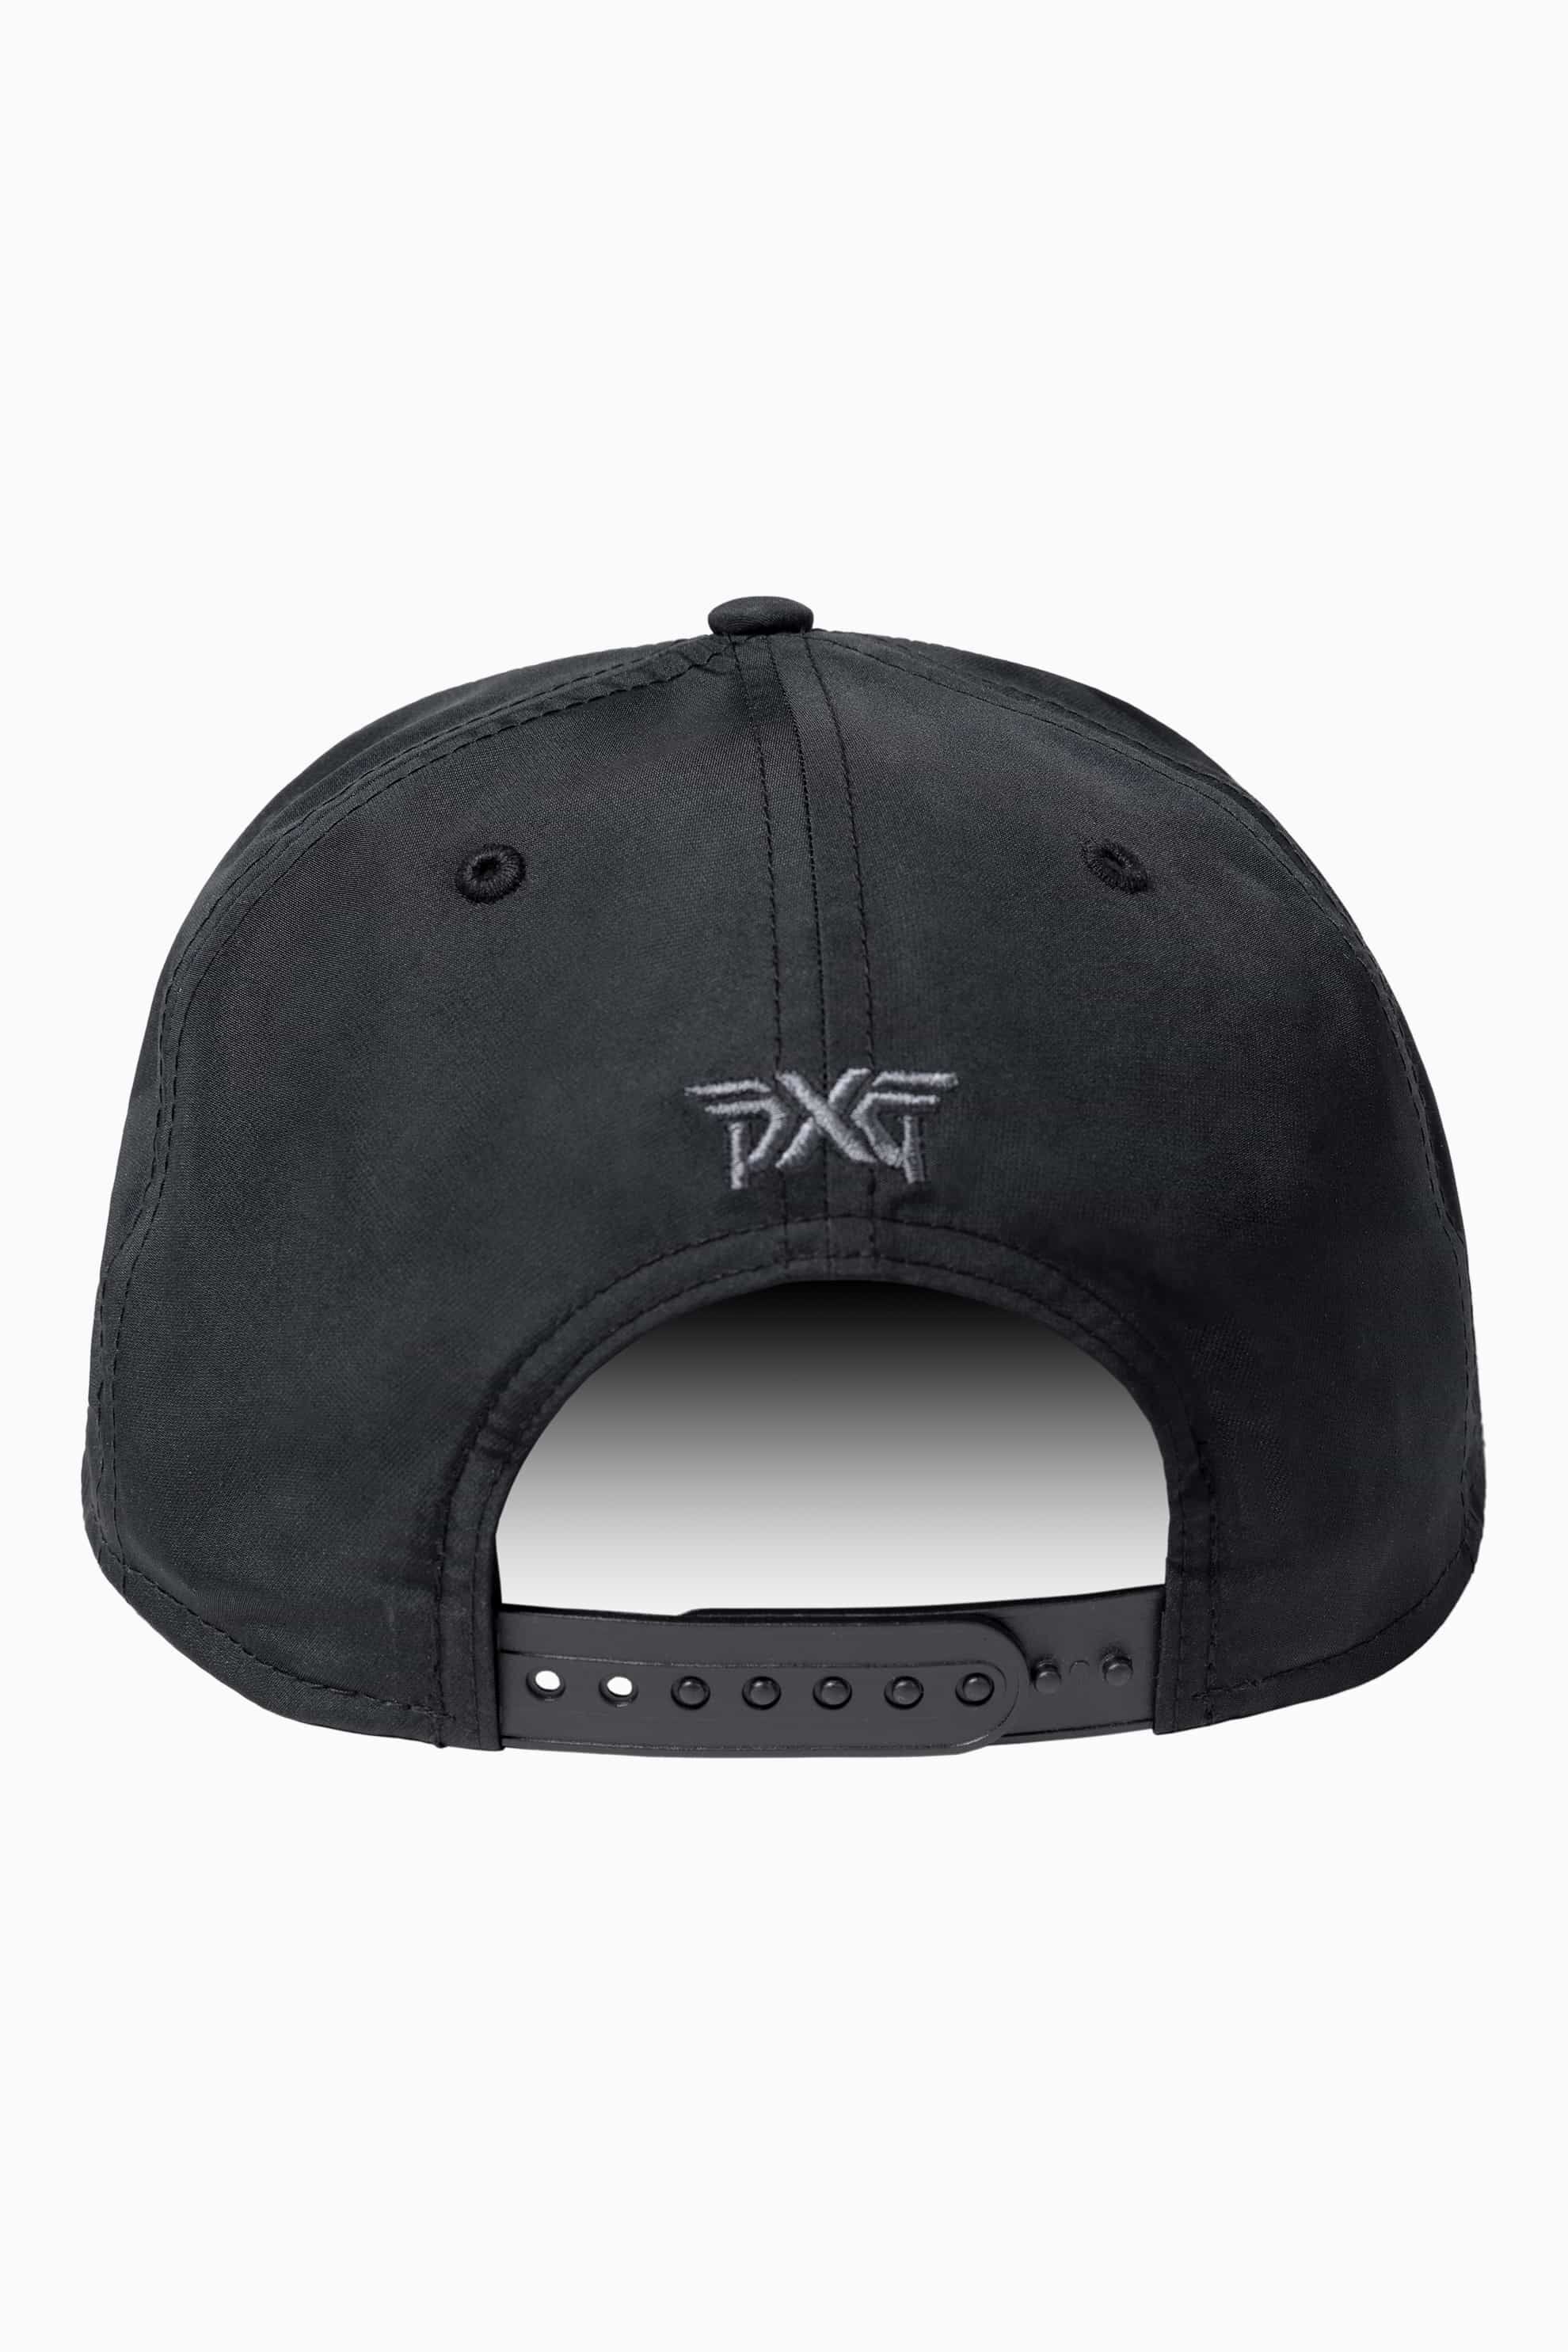 Buy Darkness Text 9Fifty Snapback Cap | PXG